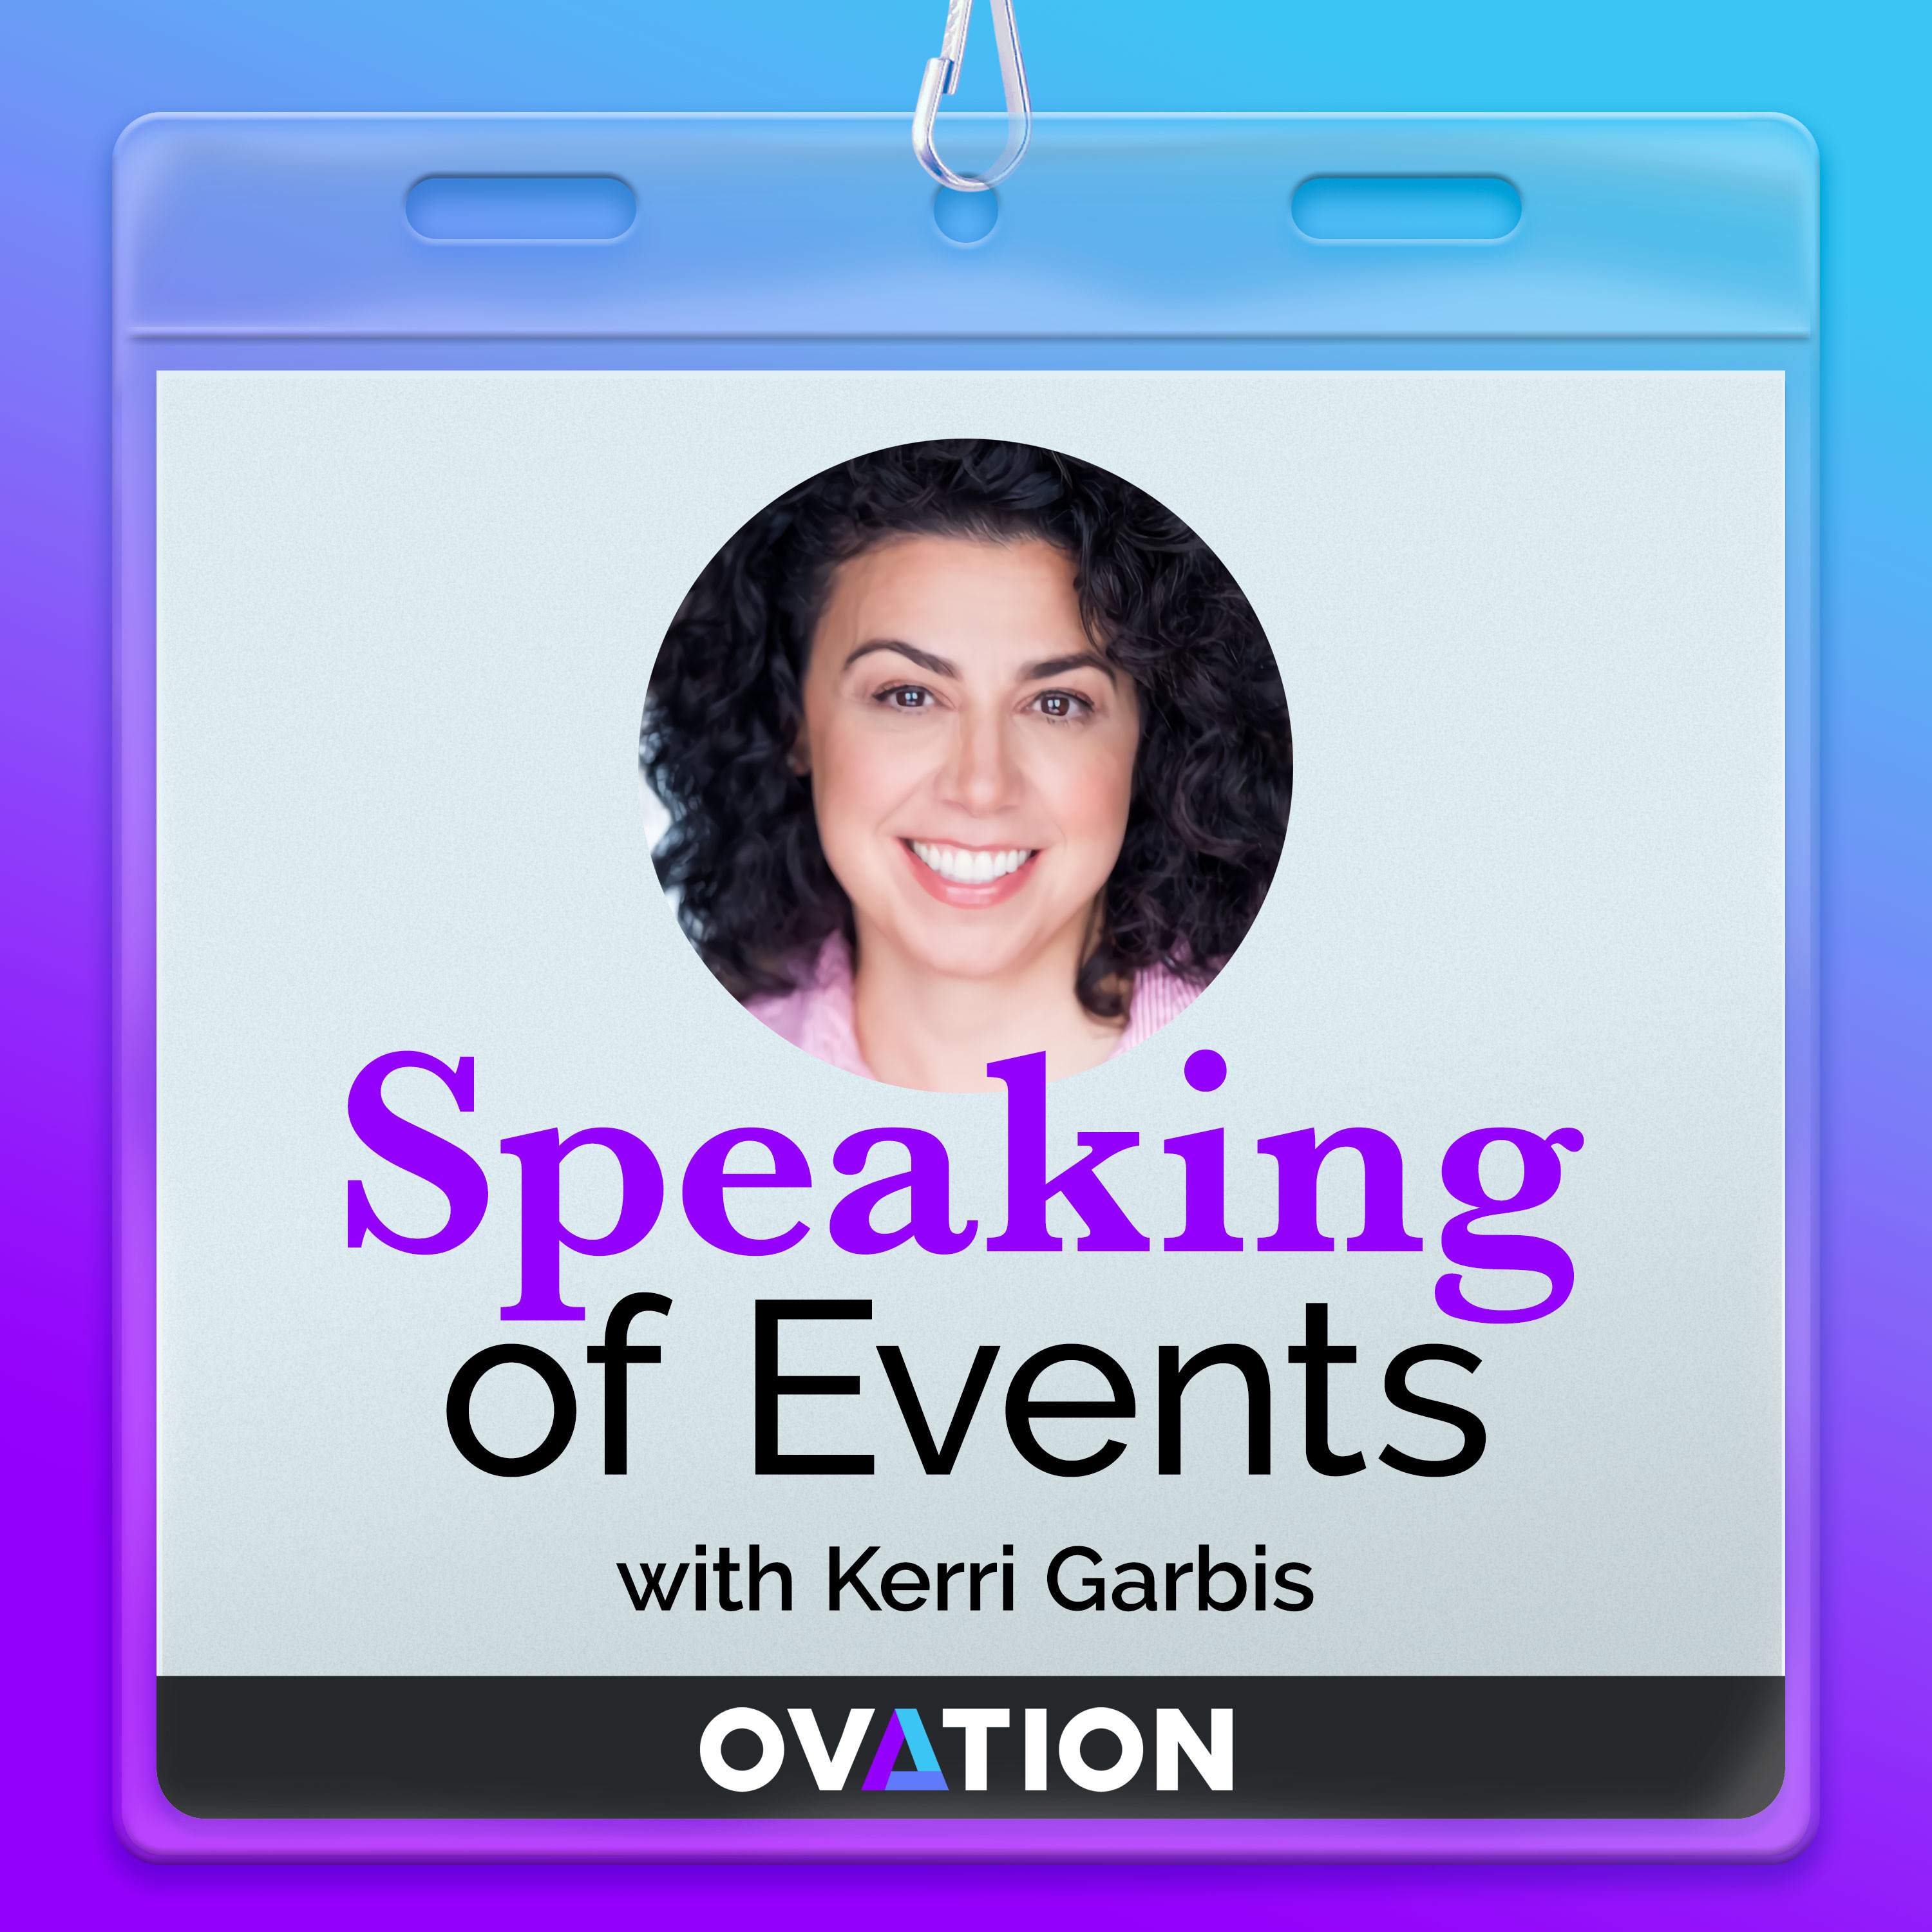 Ovation Announces "Speaking of Events" Podcast